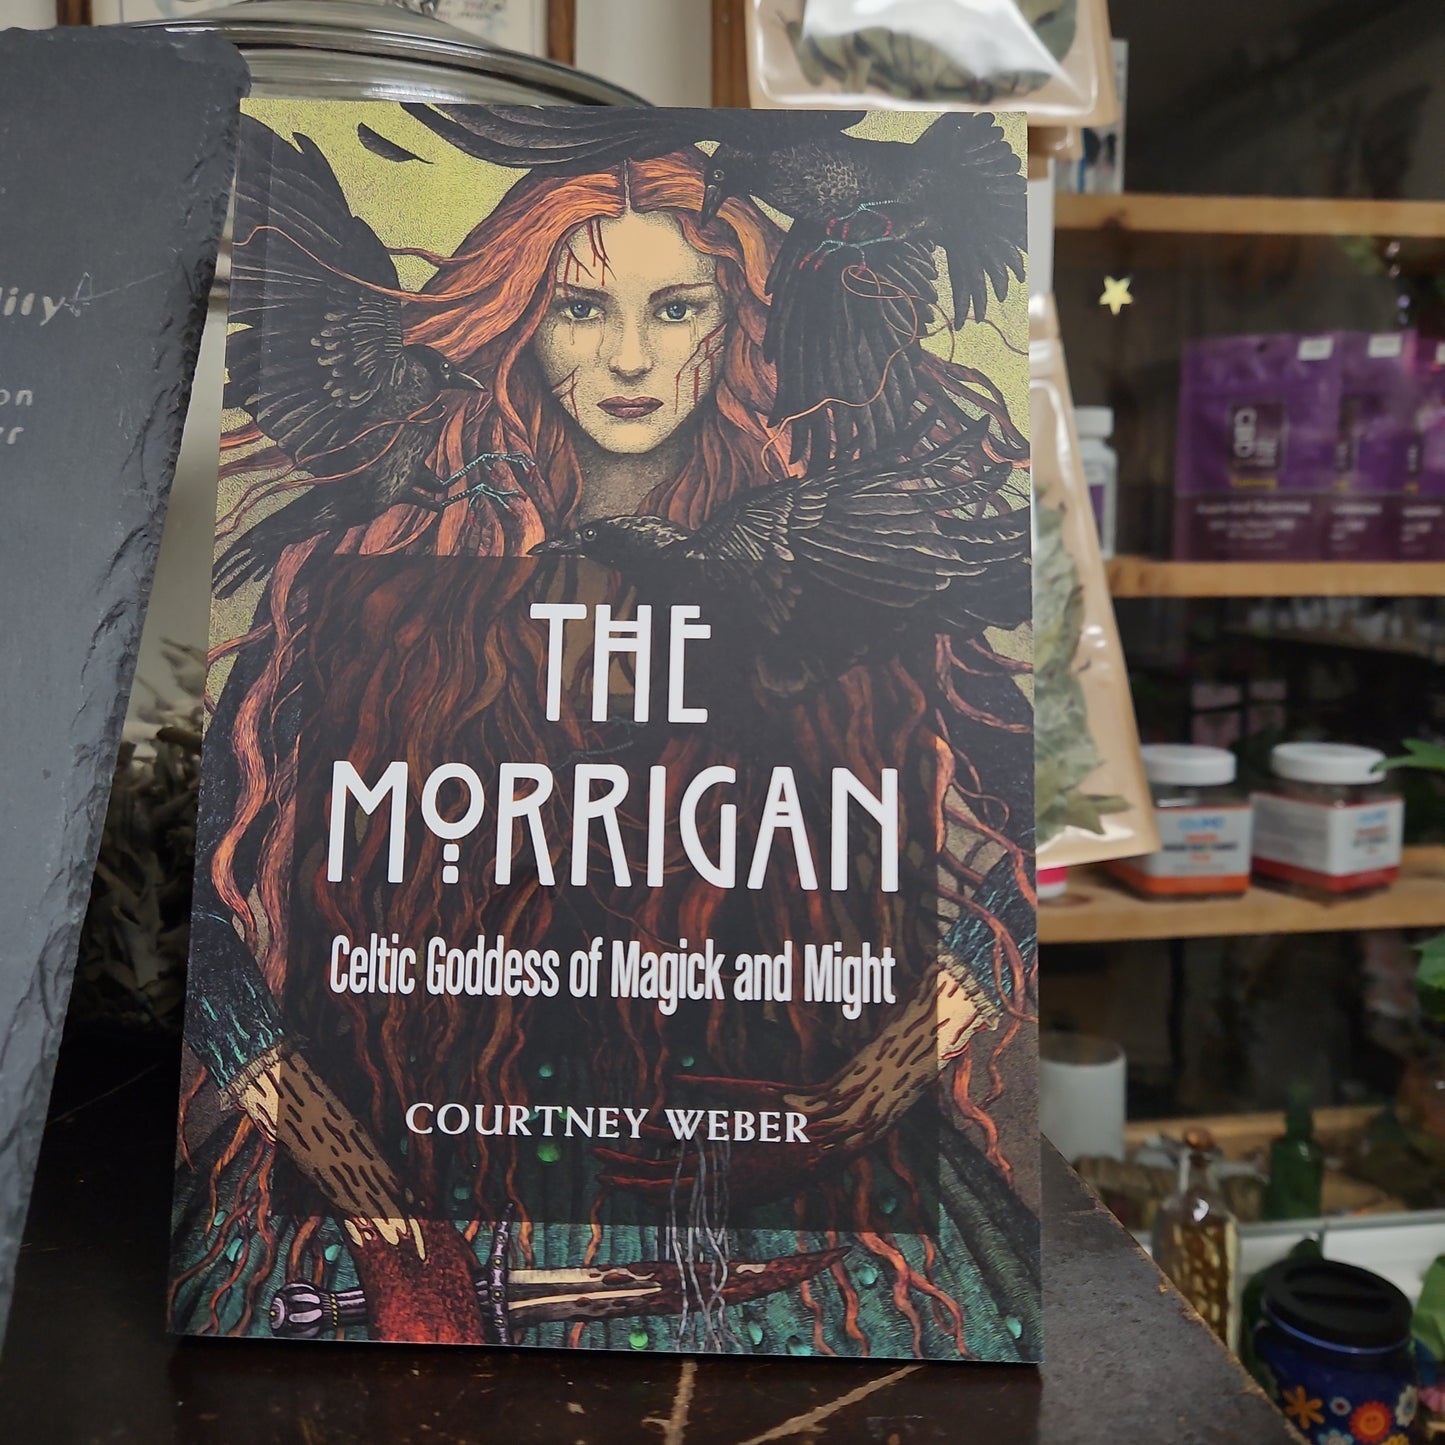 The Morrigan - Celtic Goddess of Magick And Might